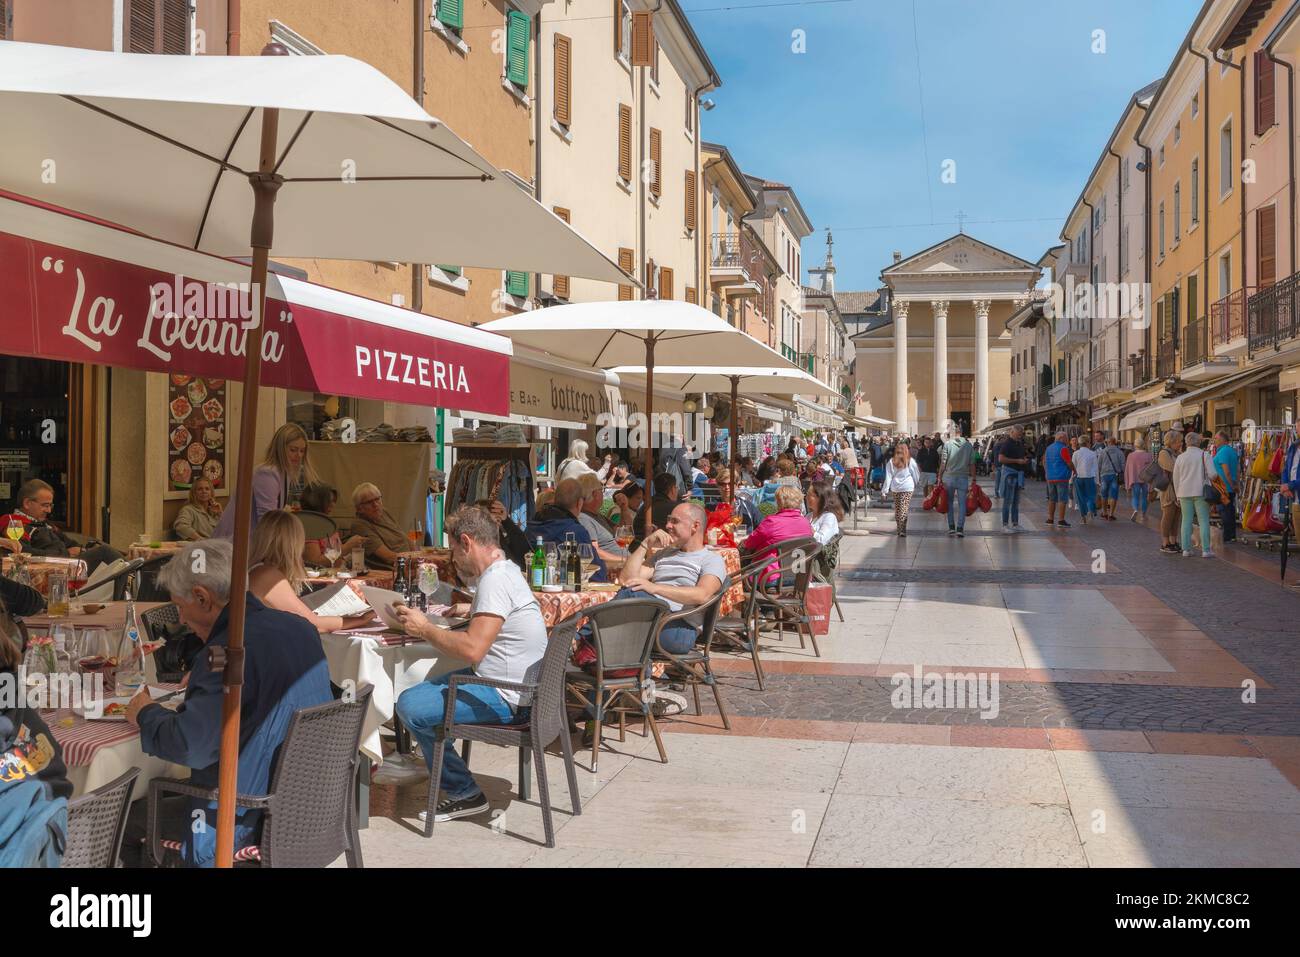 Bardolino town Italy, view in summer of people relaxing at cafe tables in Via San Martino in the historic old town center of Bardolino, Lake Garda Stock Photo